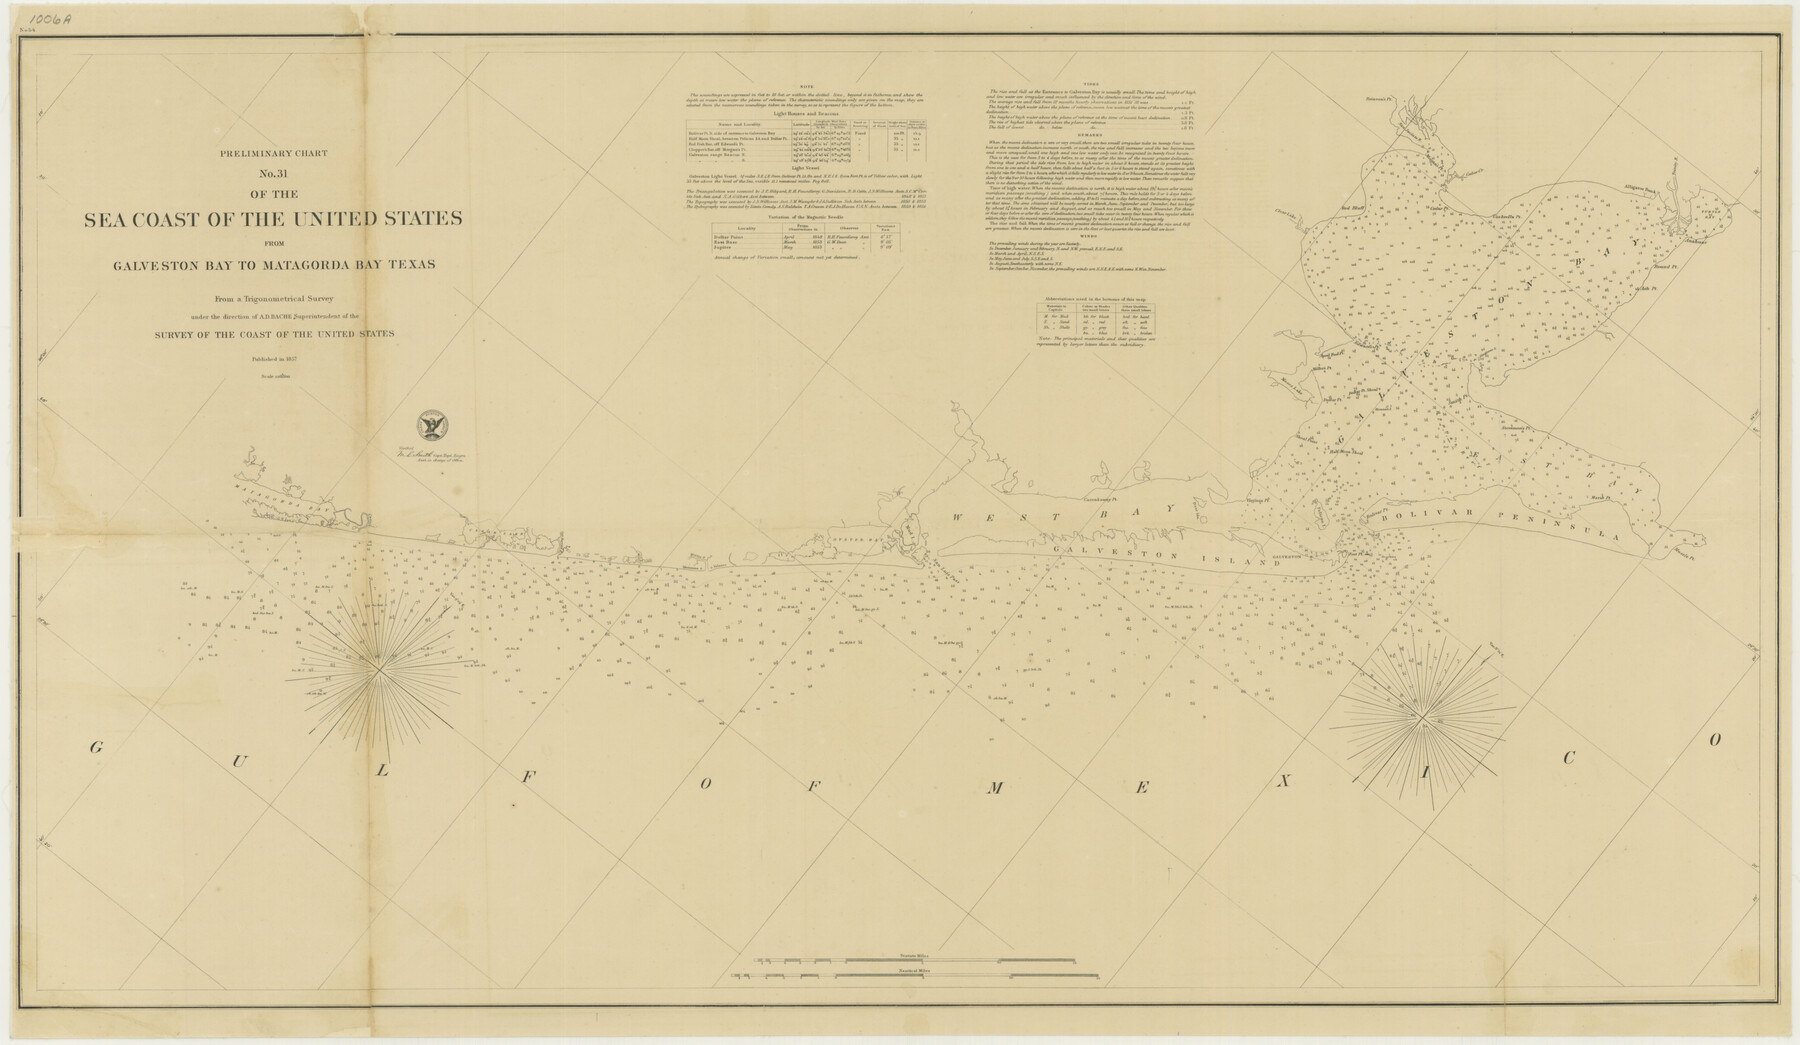 76212, Preliminary Chart No. 31 of the Sea Coast of the United States from Galveston Bay to Matagorda Bay, Texas, Texas State Library and Archives